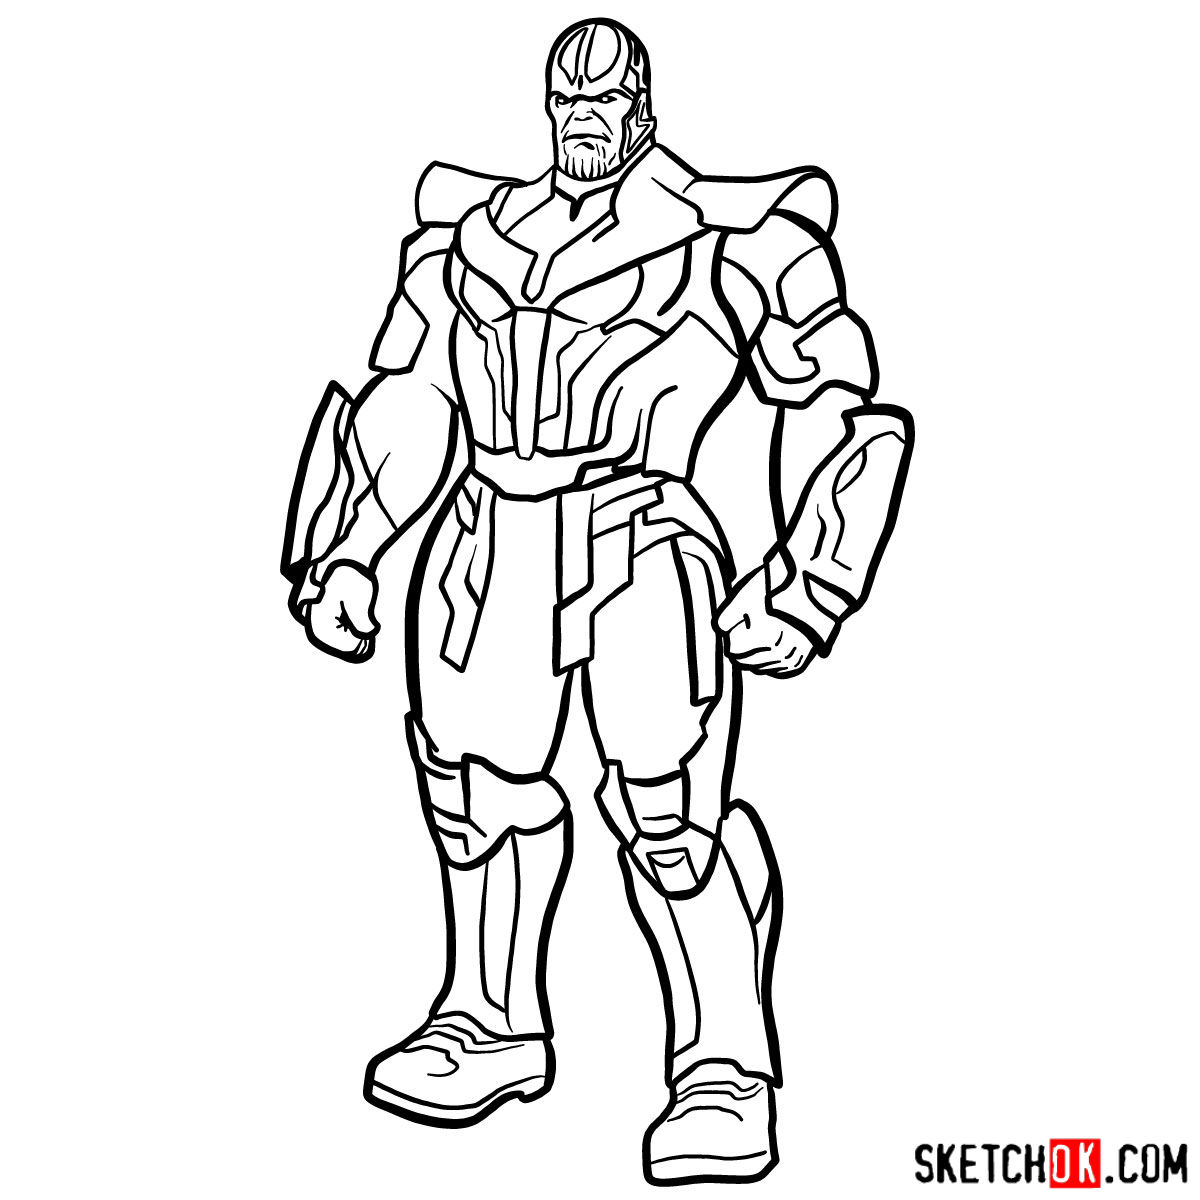 How to Draw Thanos with 5 Infinity Stones: A Sketch to Showcase the Titan's  Might